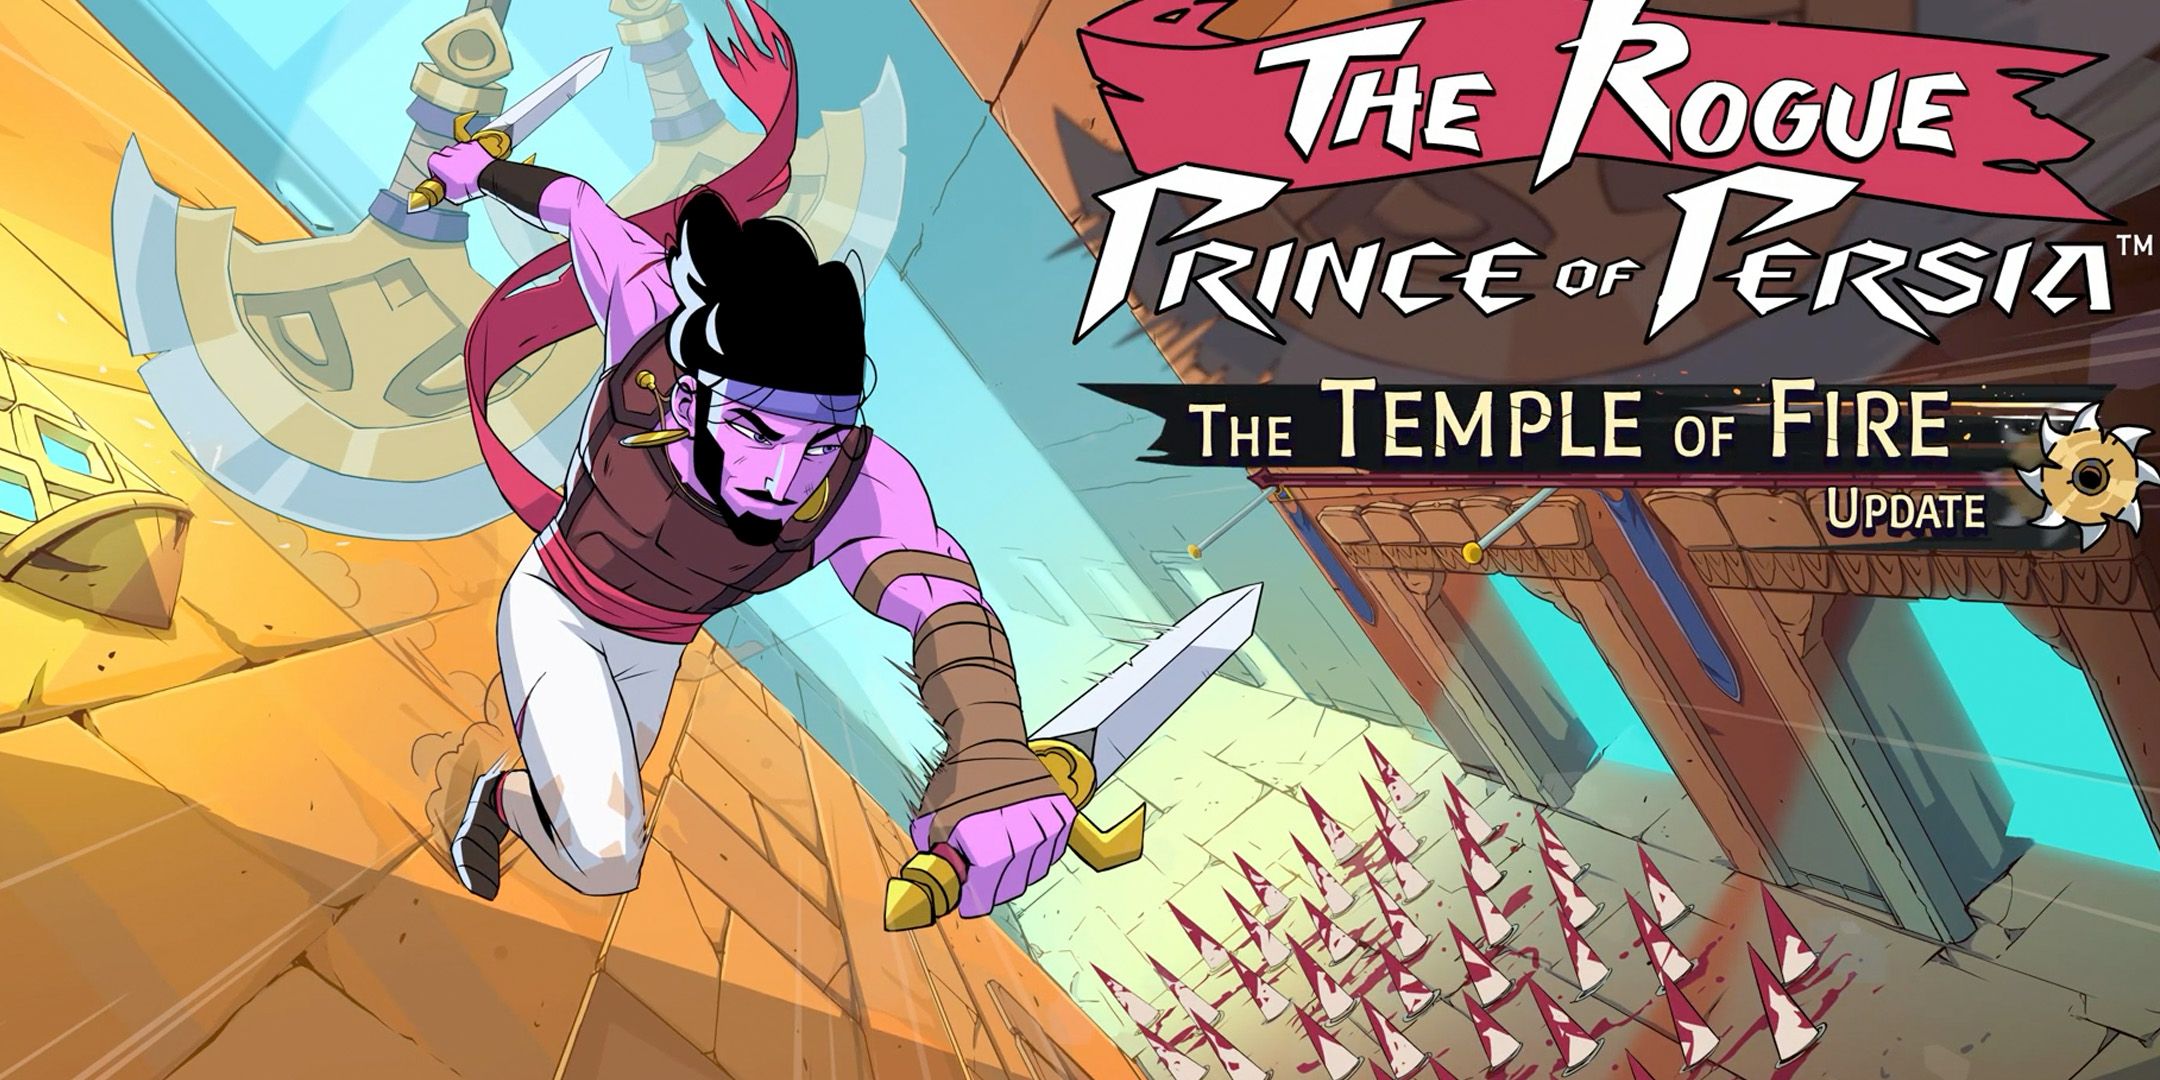 The-Rogue-Prince-of-Persia- Temple-of-Fire-Update-Trailer